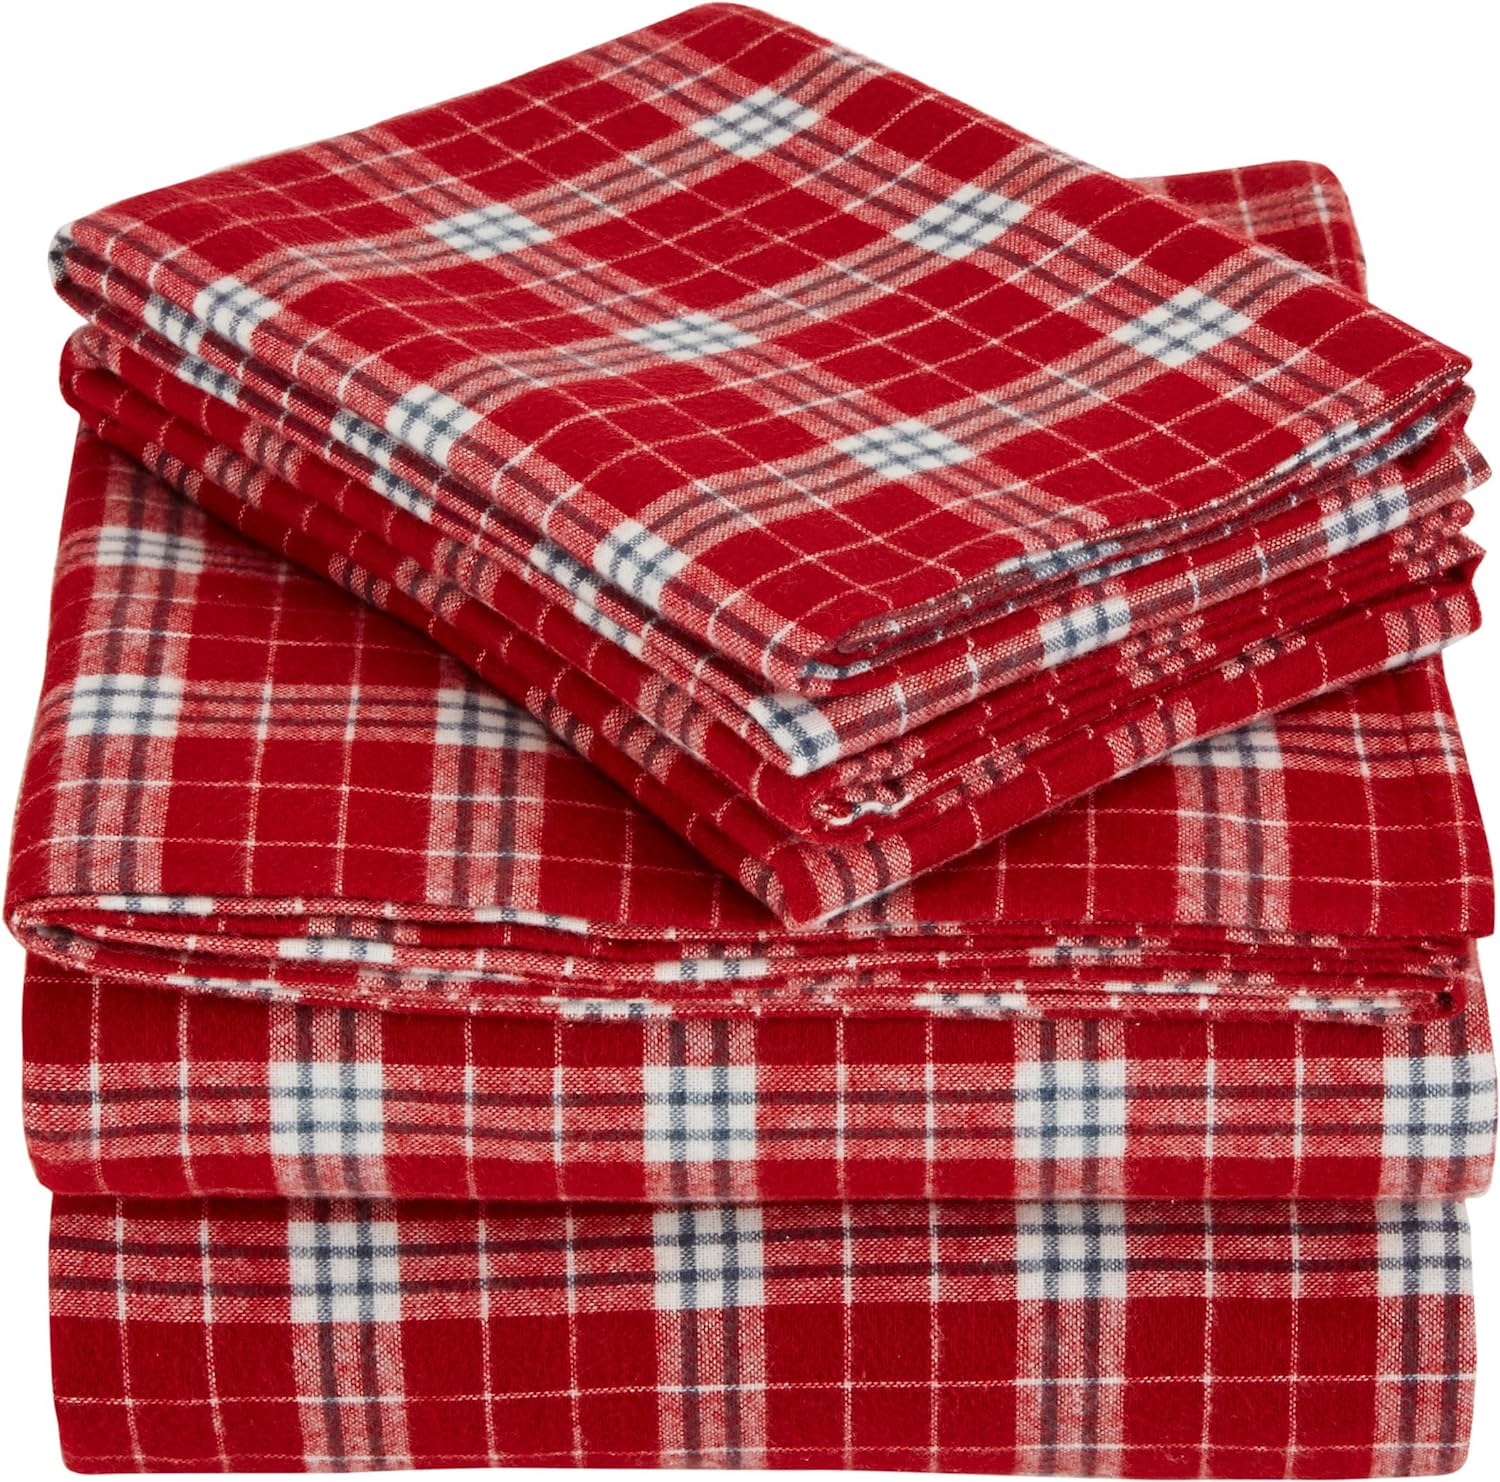 Pinzon Double-Napped Flannel Bed Sheets, 4-Piece